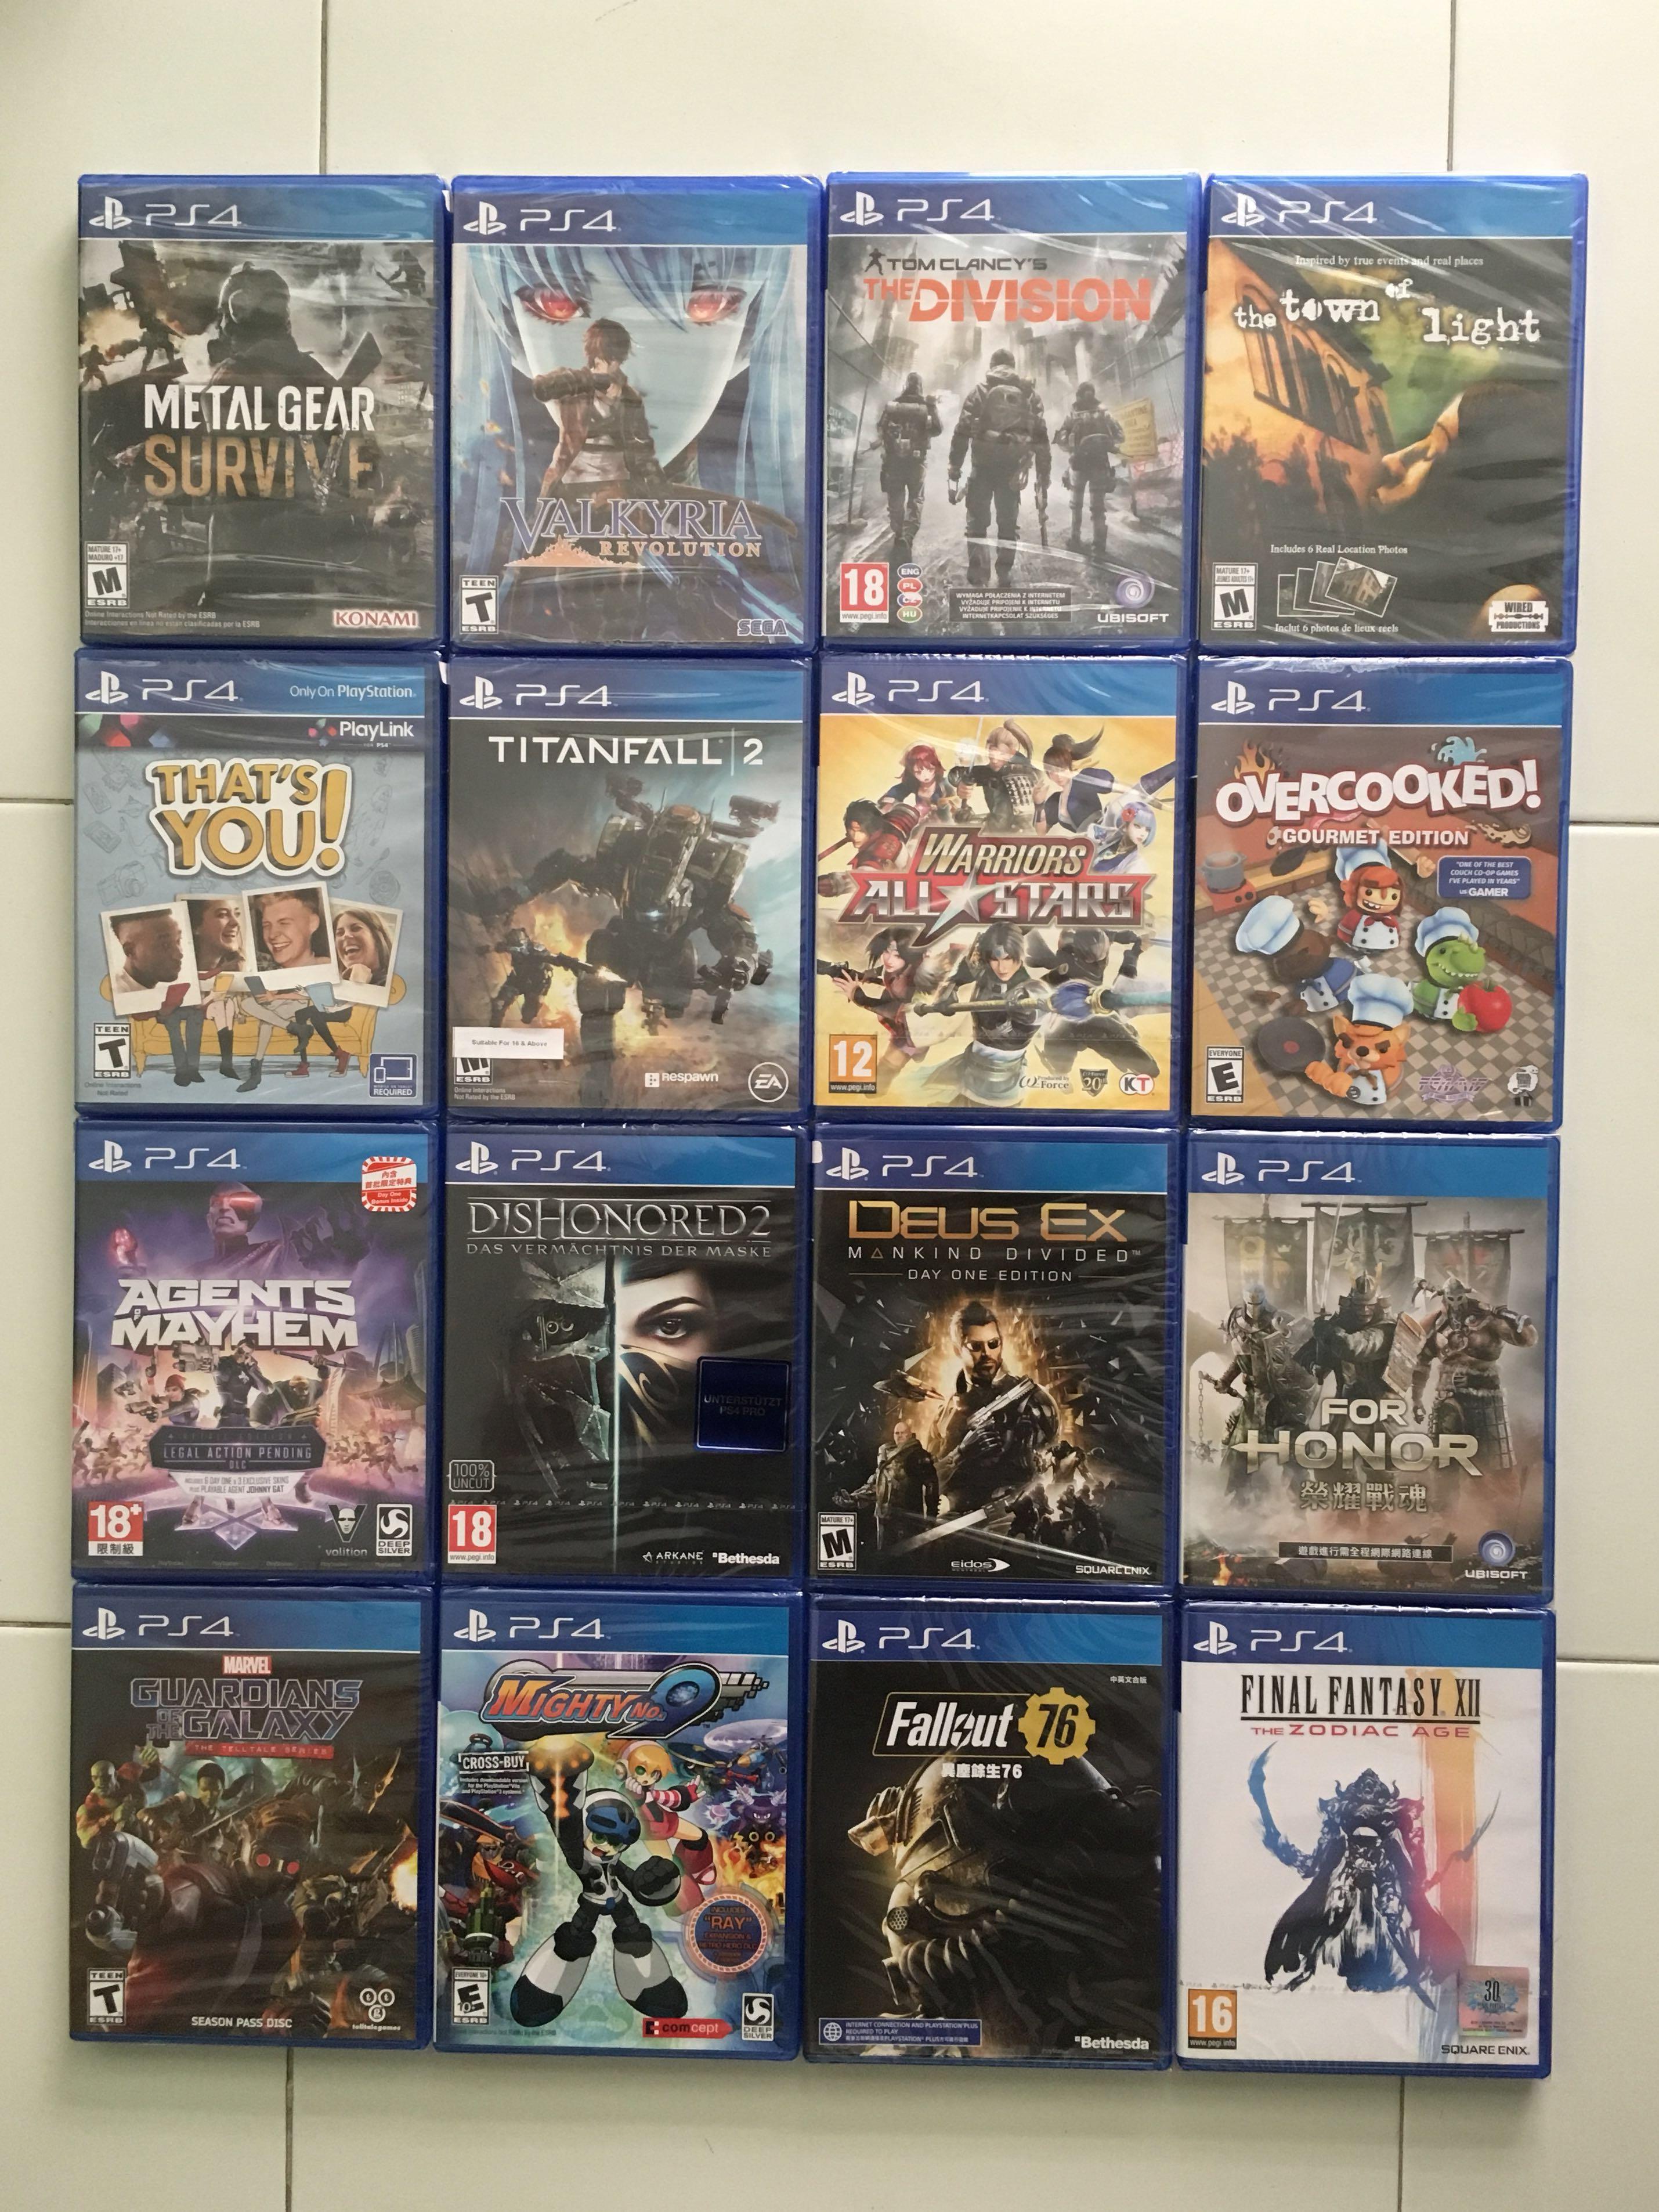 ps4 games on sale